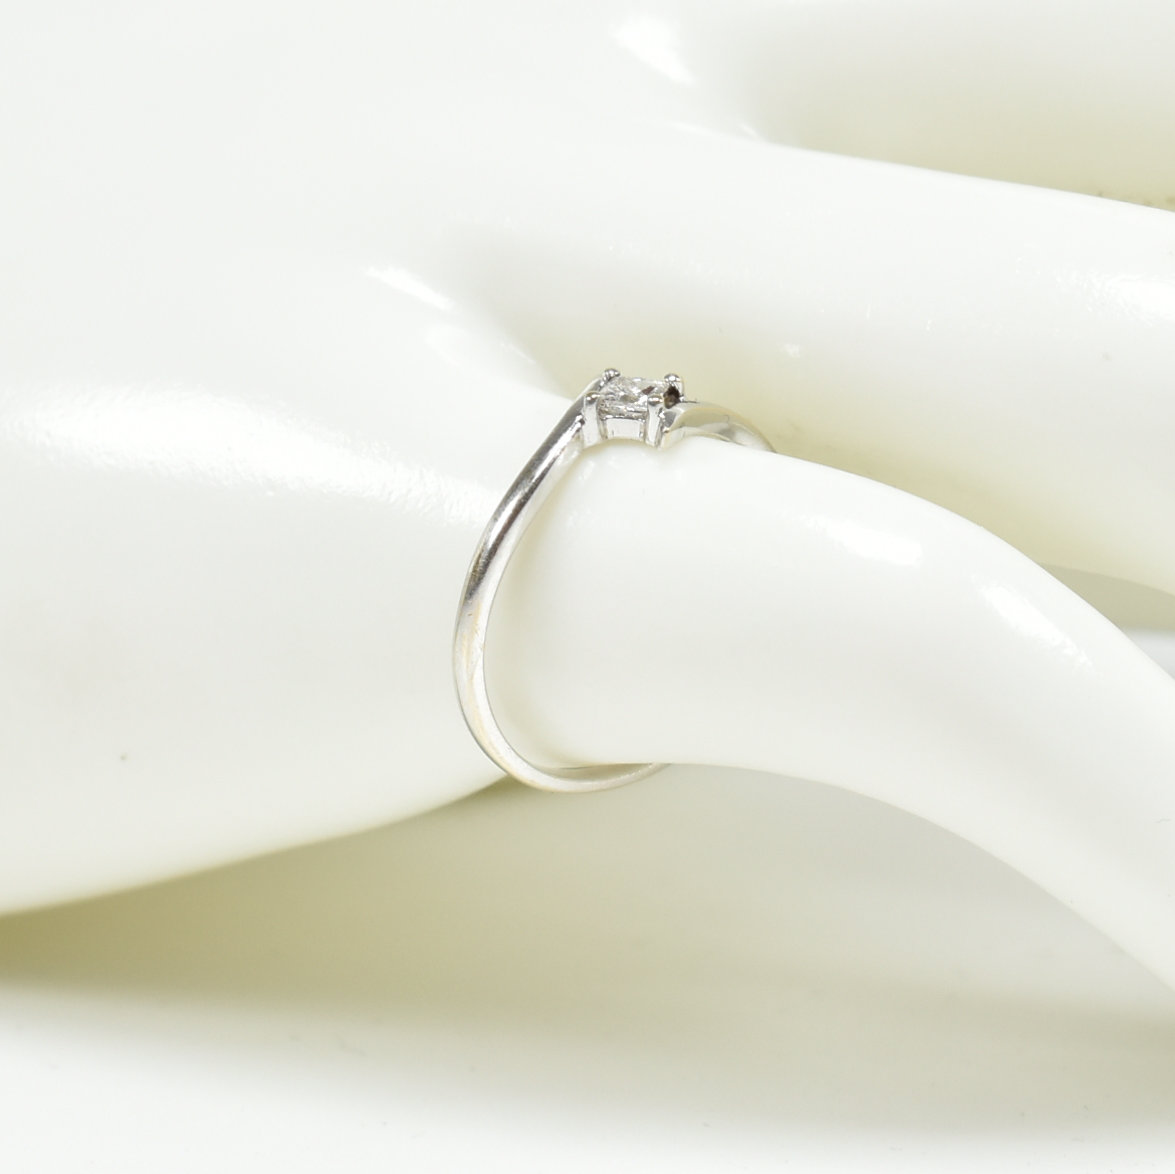 TWO 18CT WHITE GOLD & DIAMOND SOLITAIRE RINGS - Image 12 of 14